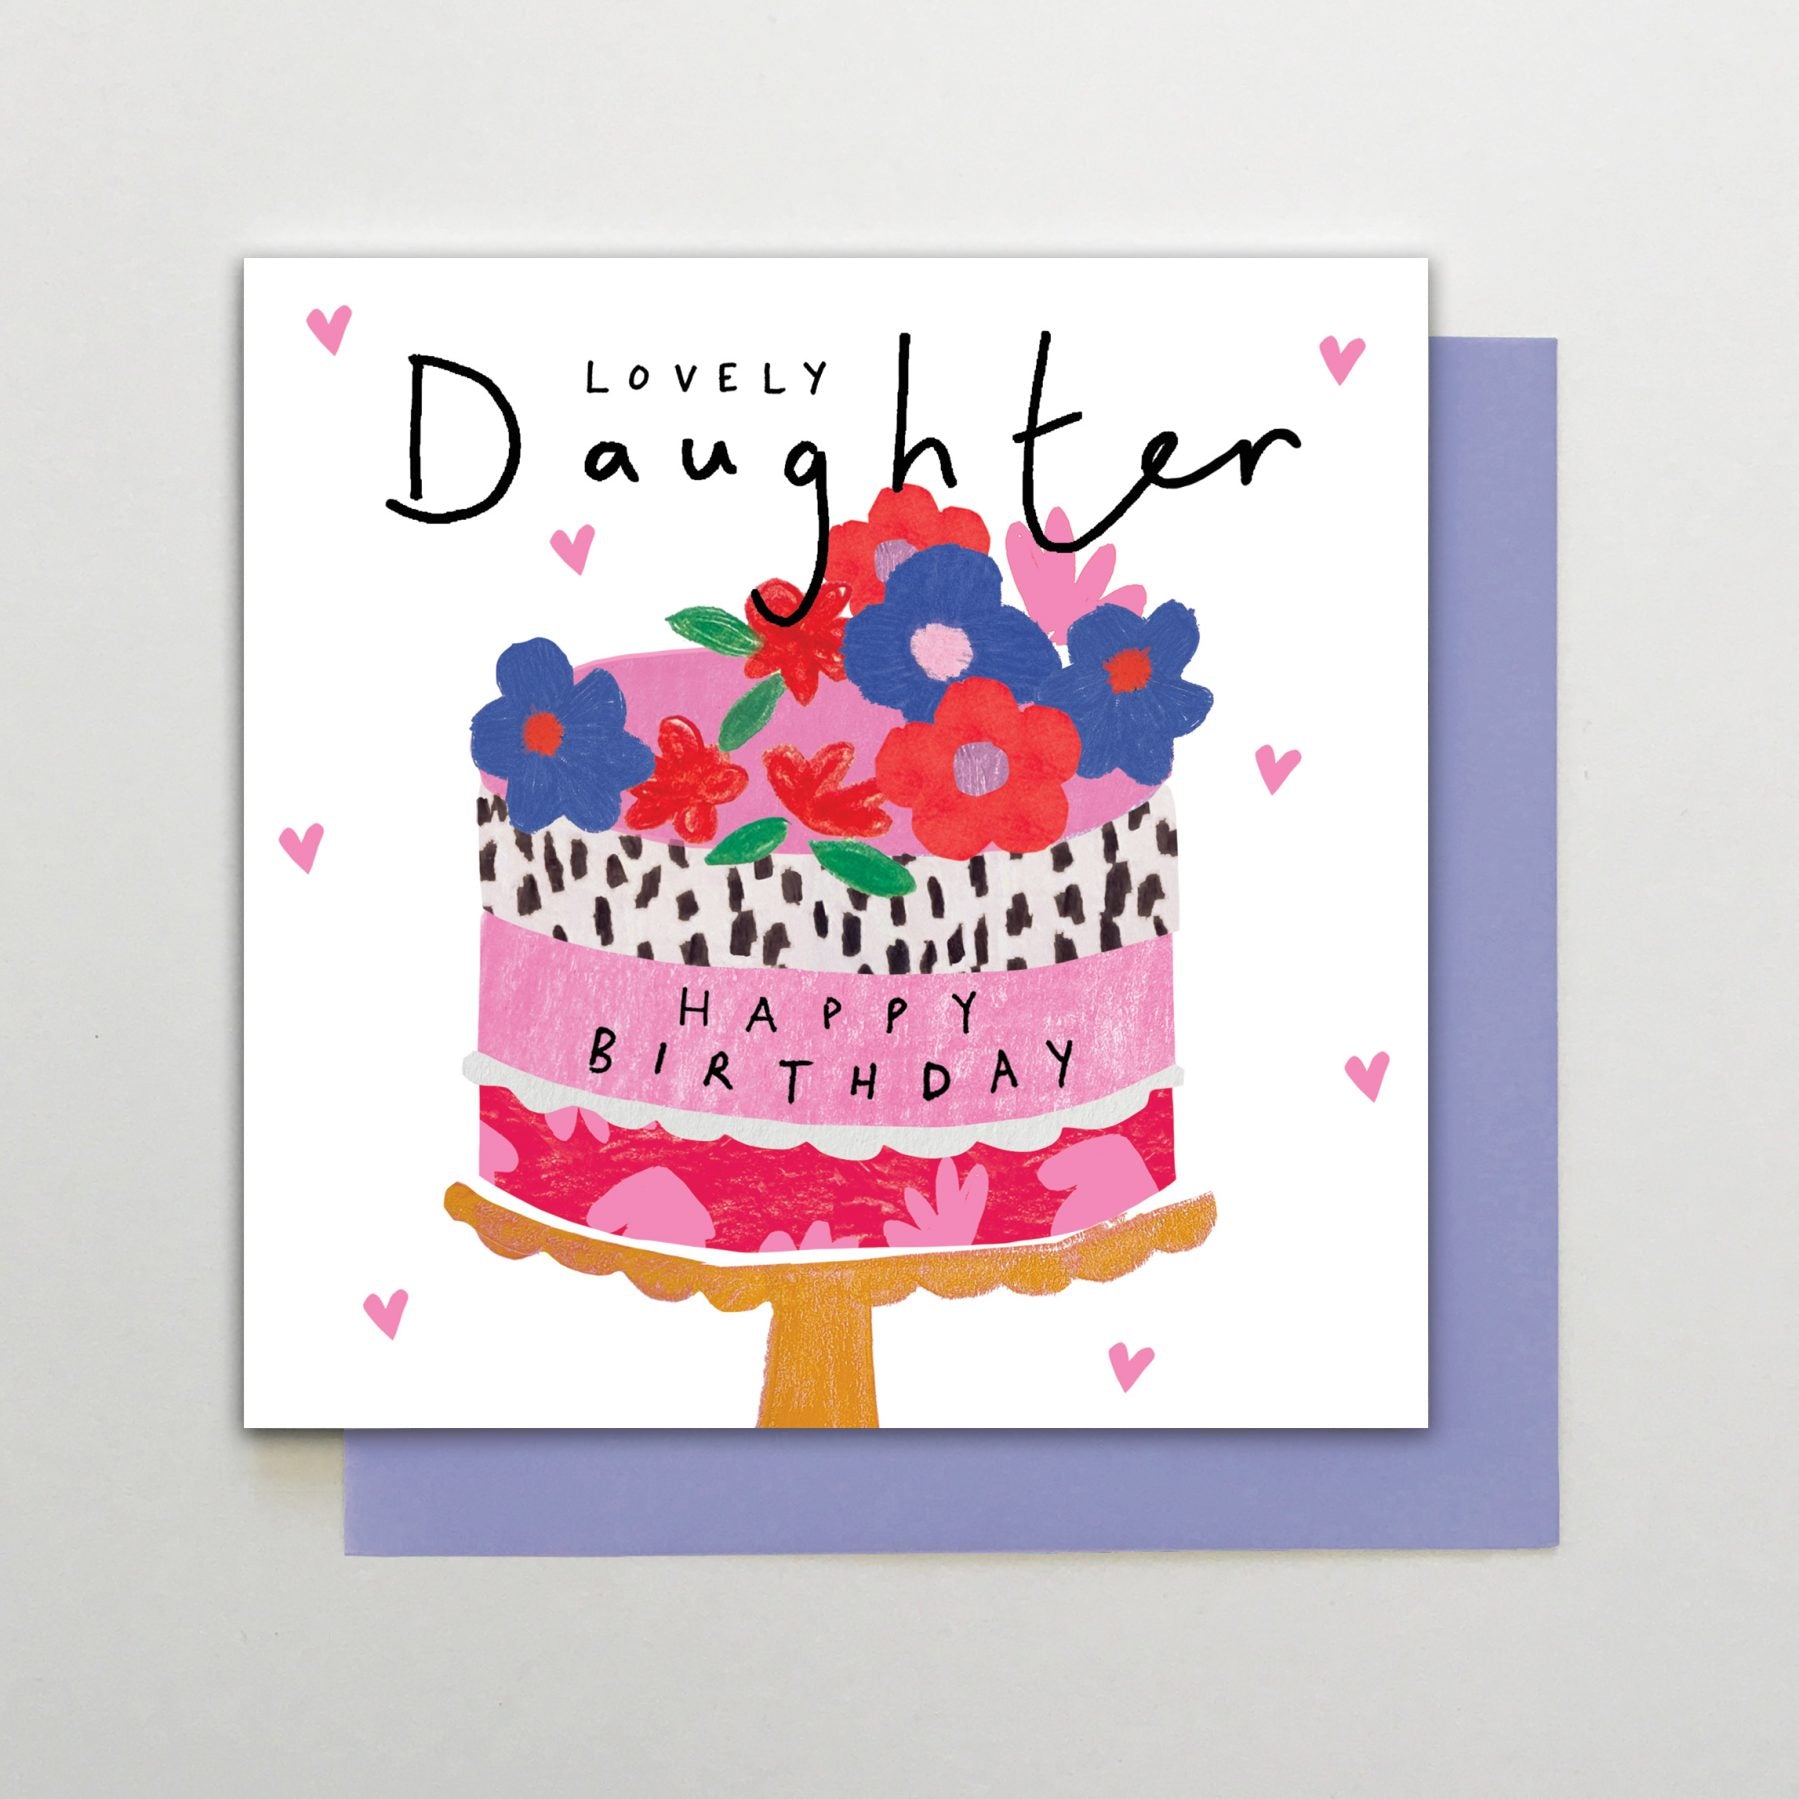 Lovely　Daisy　Gift　Clock　Stop　Birthday　Daughter　Chain　Cake　Card　The　Company